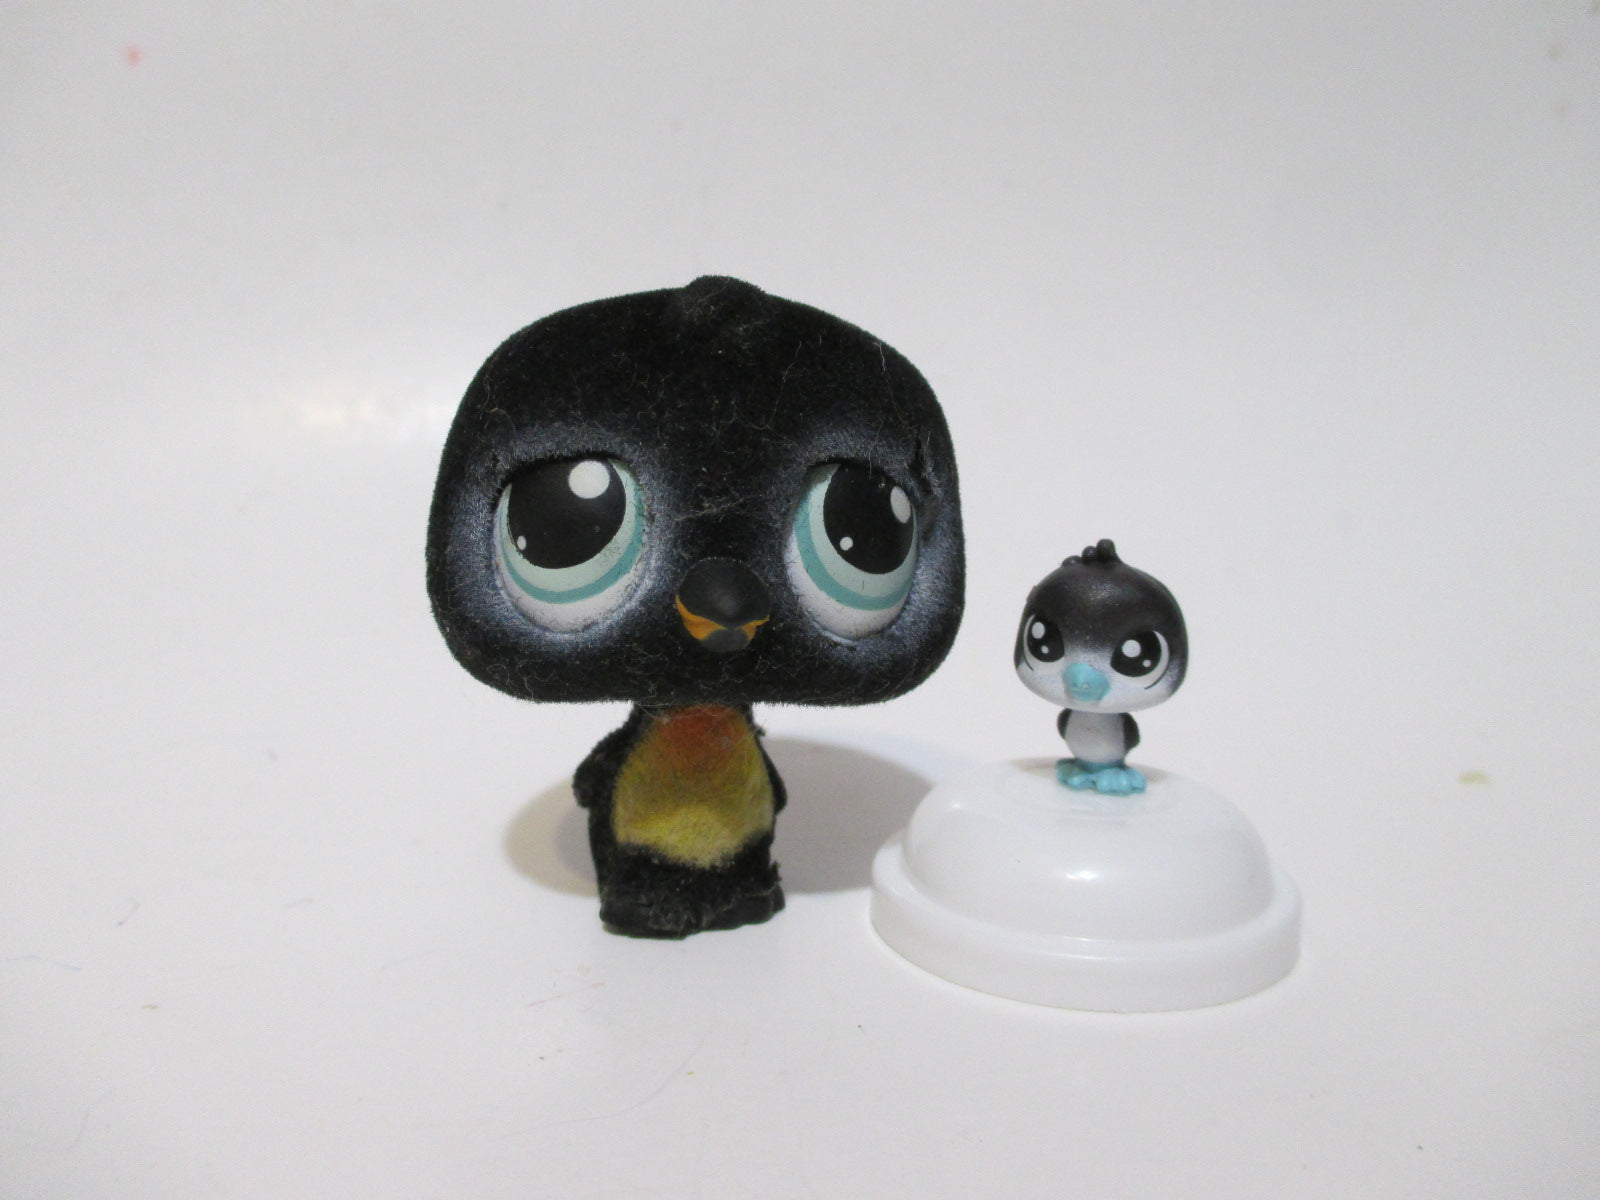 Littlest Pet Shop Penguin Bird Black Fuzzy Furry 333 and Tiniest Penguin  1-47 Set Authentic LPS Slightly Blemished as Shown JN13A86